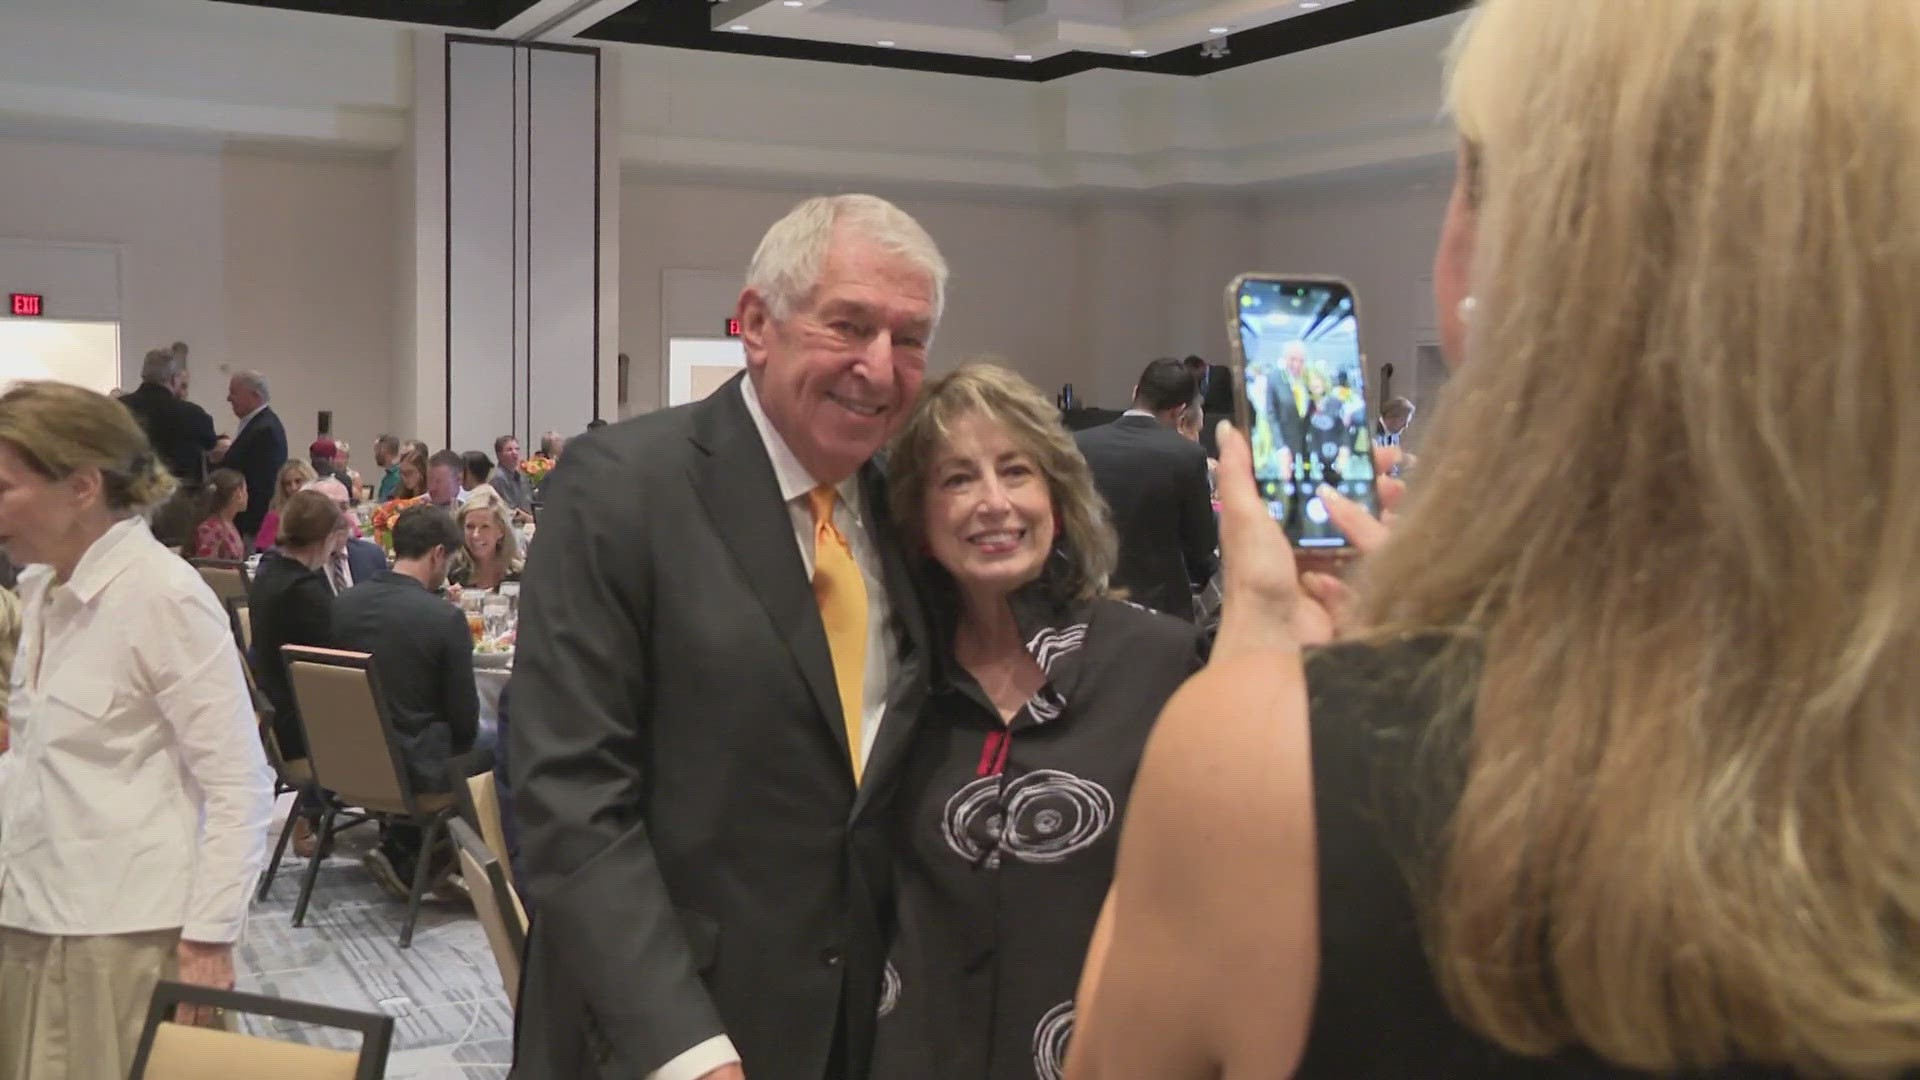 The basketball hall-of-famer and former owner of the Suns and Diamondbacks was honored during a luncheon for his impact and dedication over the years.